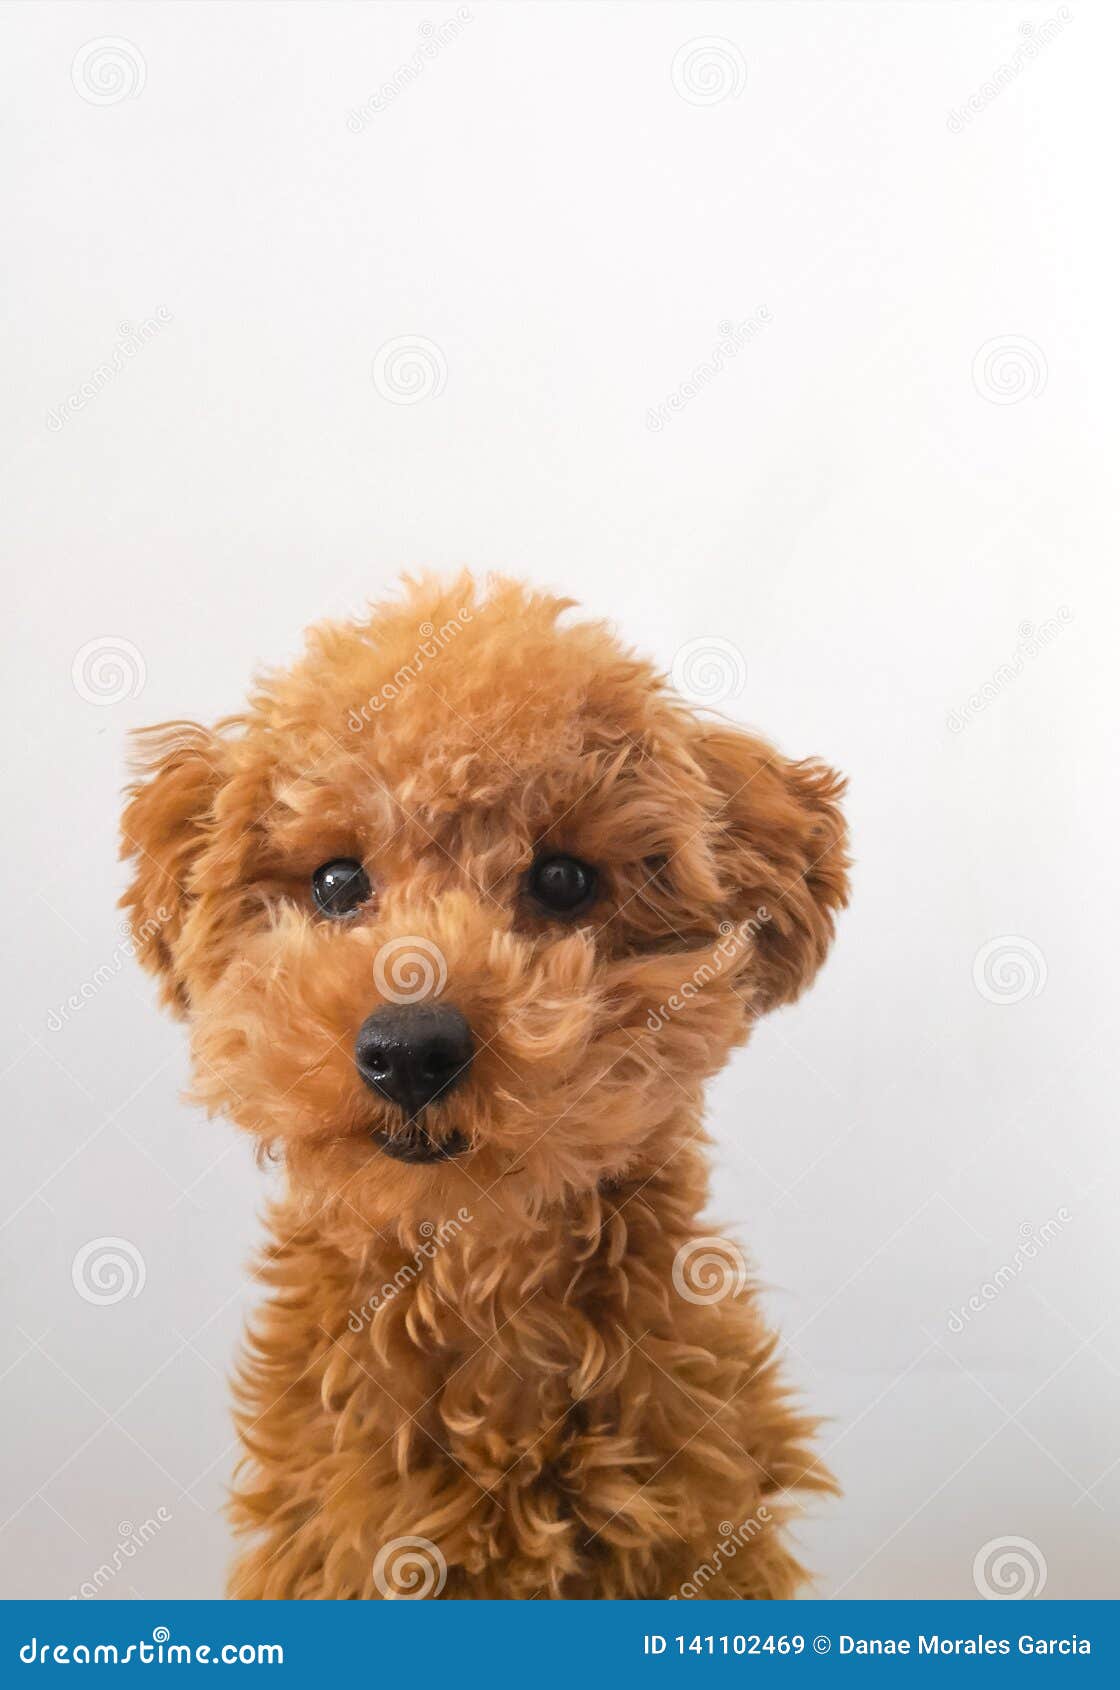 passport picture of a toy poodle!